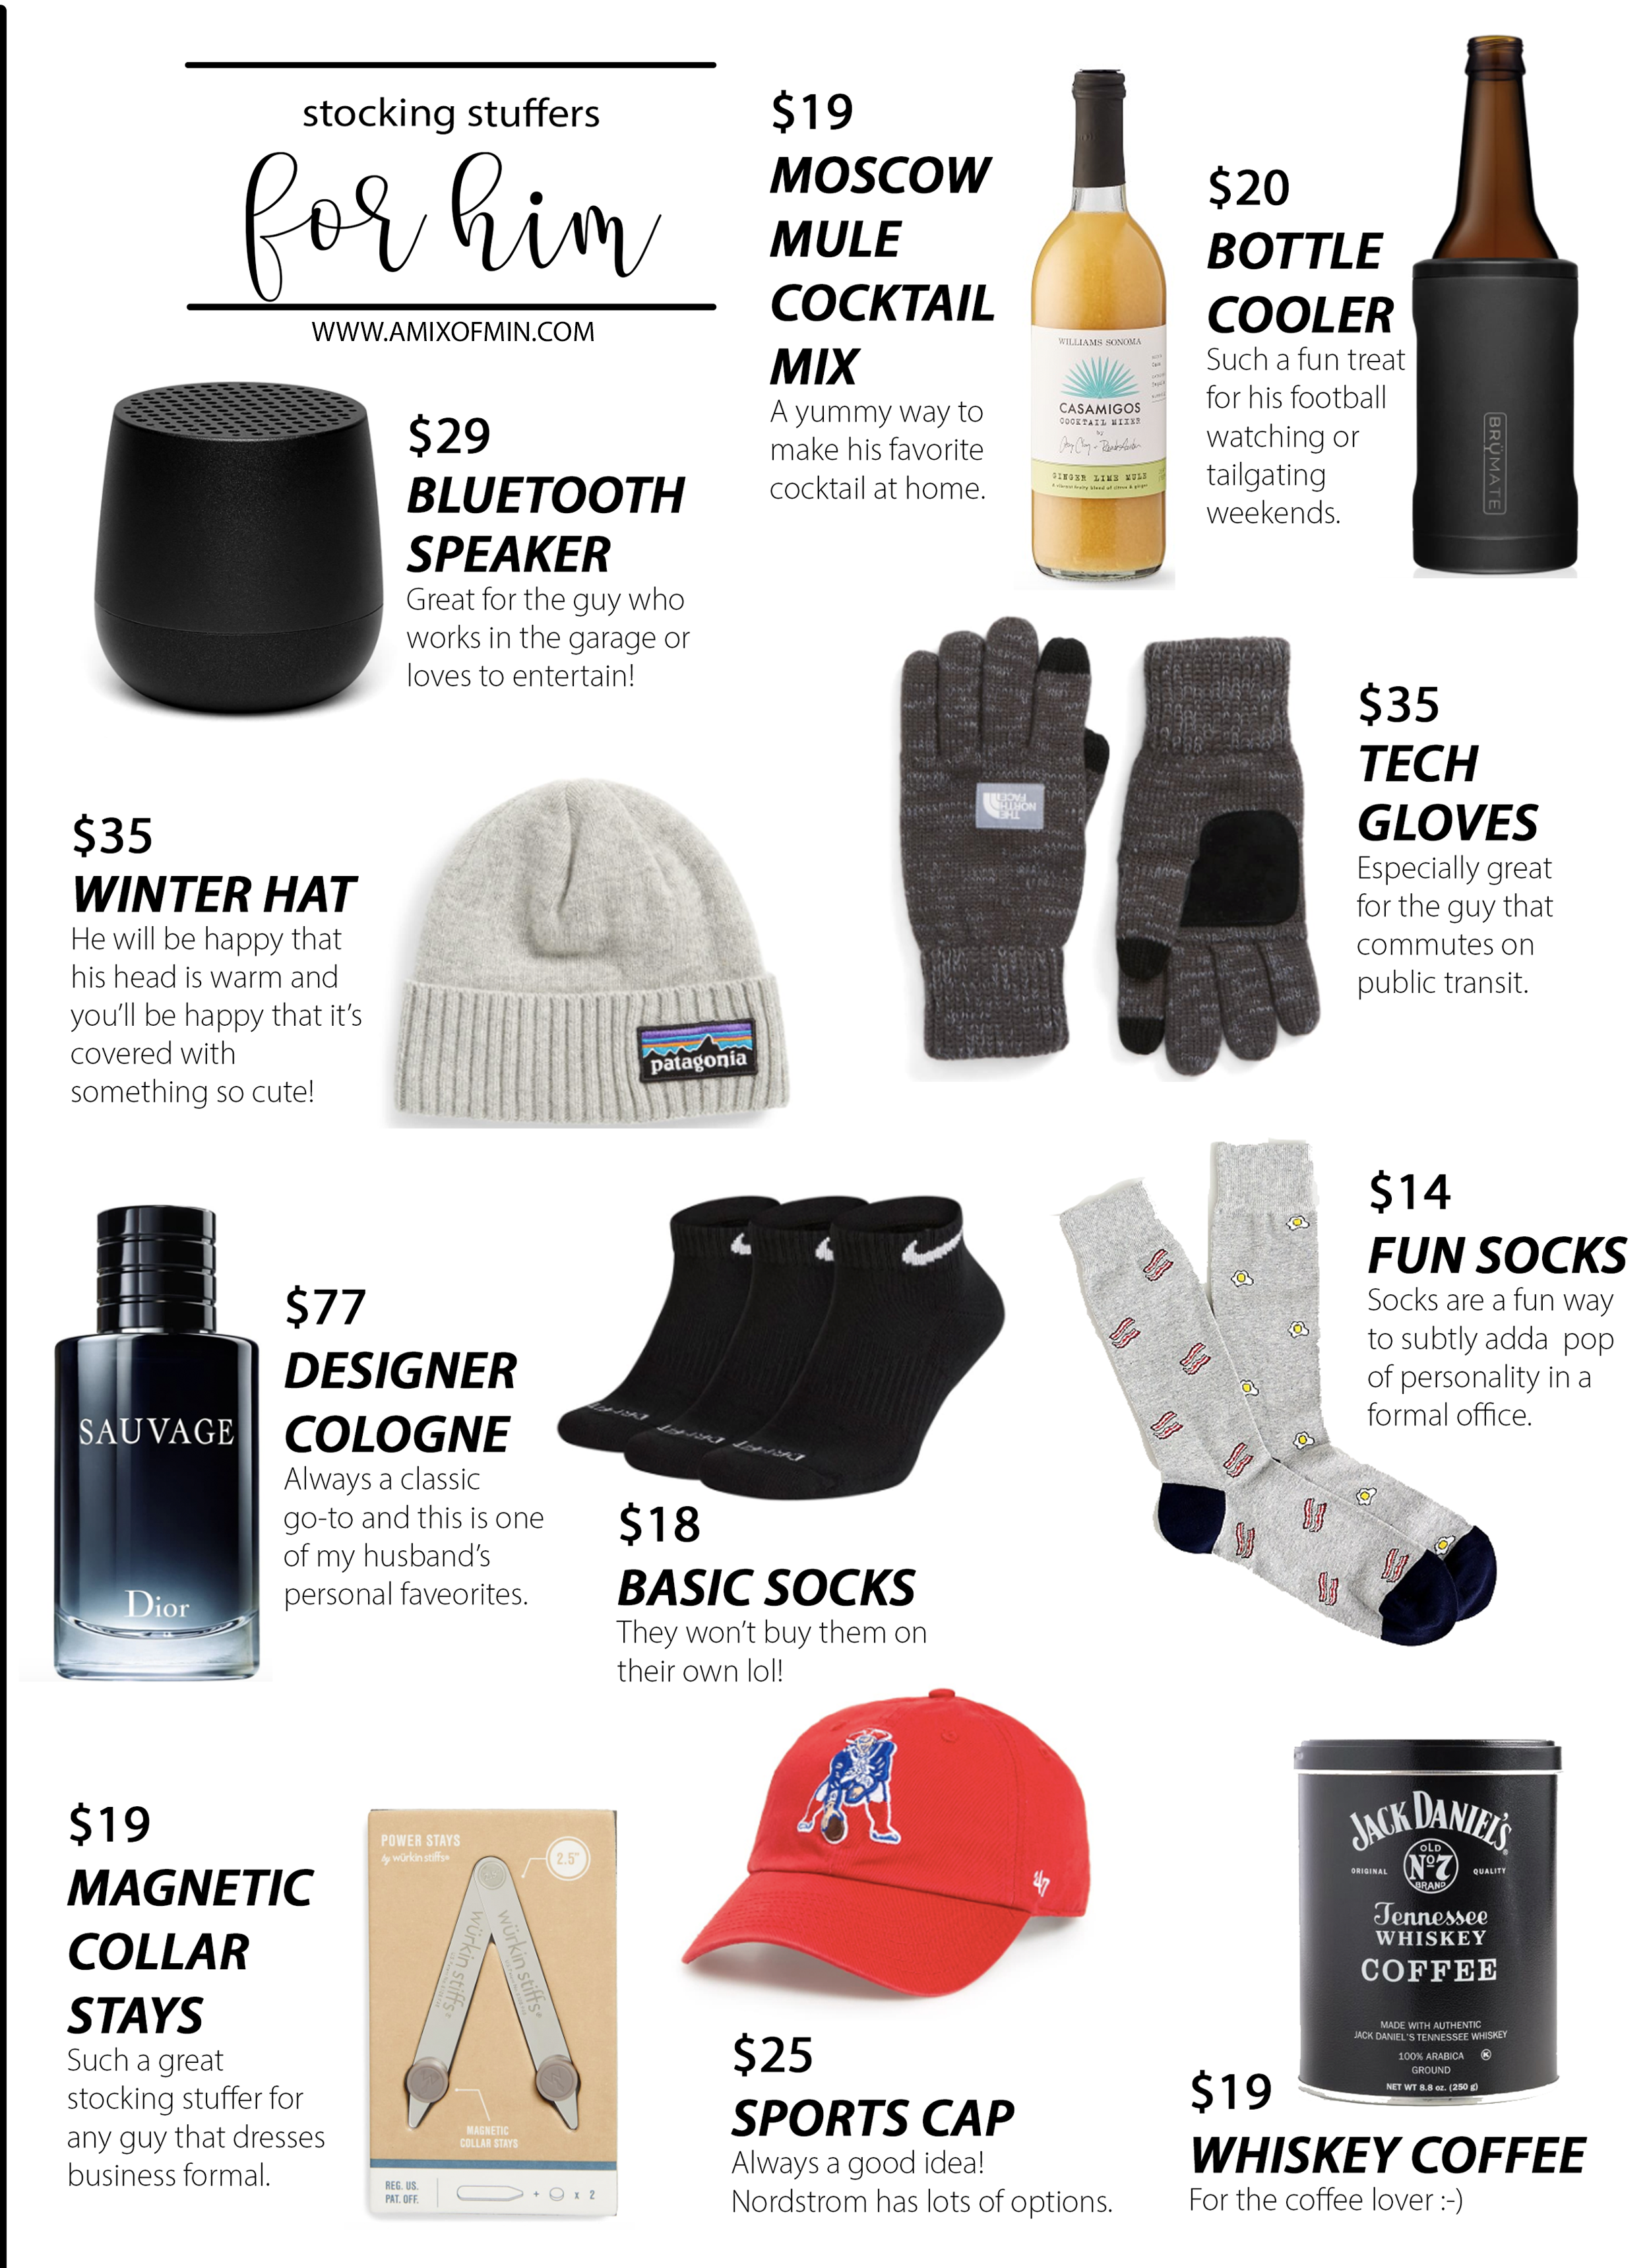 https://servelloandcointeriors.com/wp-content/uploads/2019/11/holiday-gift-guide-stocking-stuffers-him-2500.png